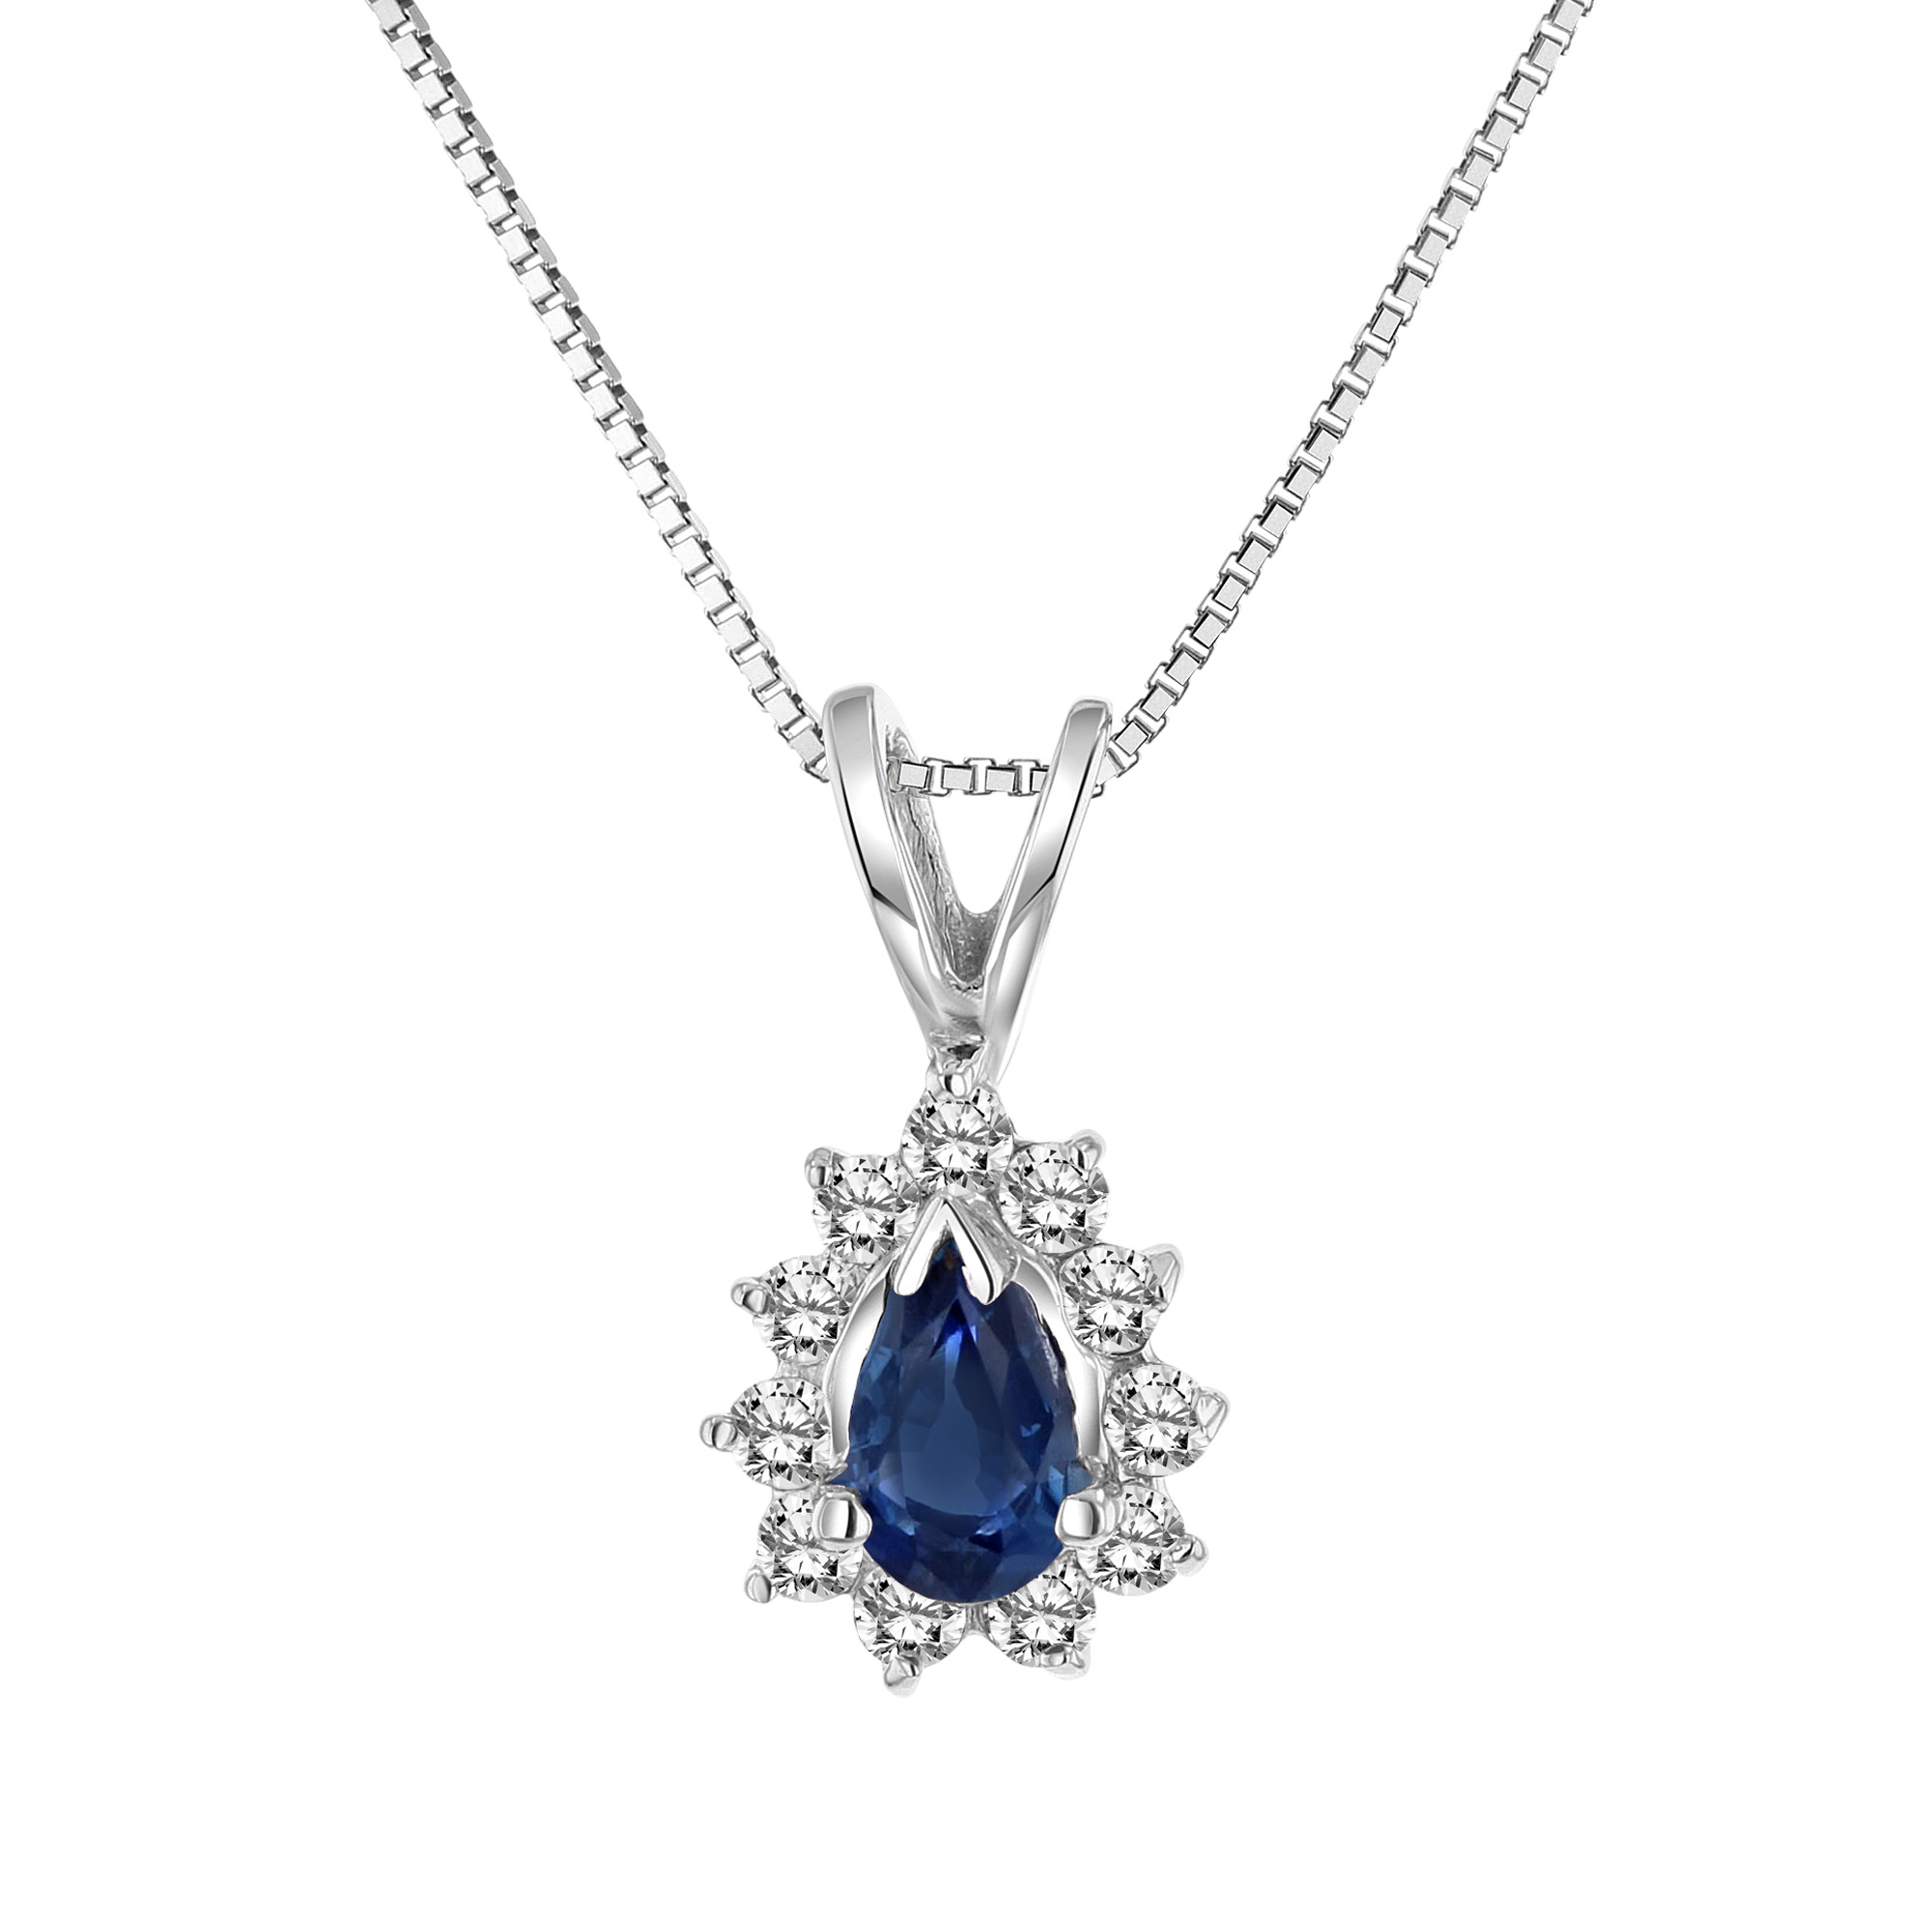 View 0.35cttw Diamond and Sapphire Pendant in 14k Gold